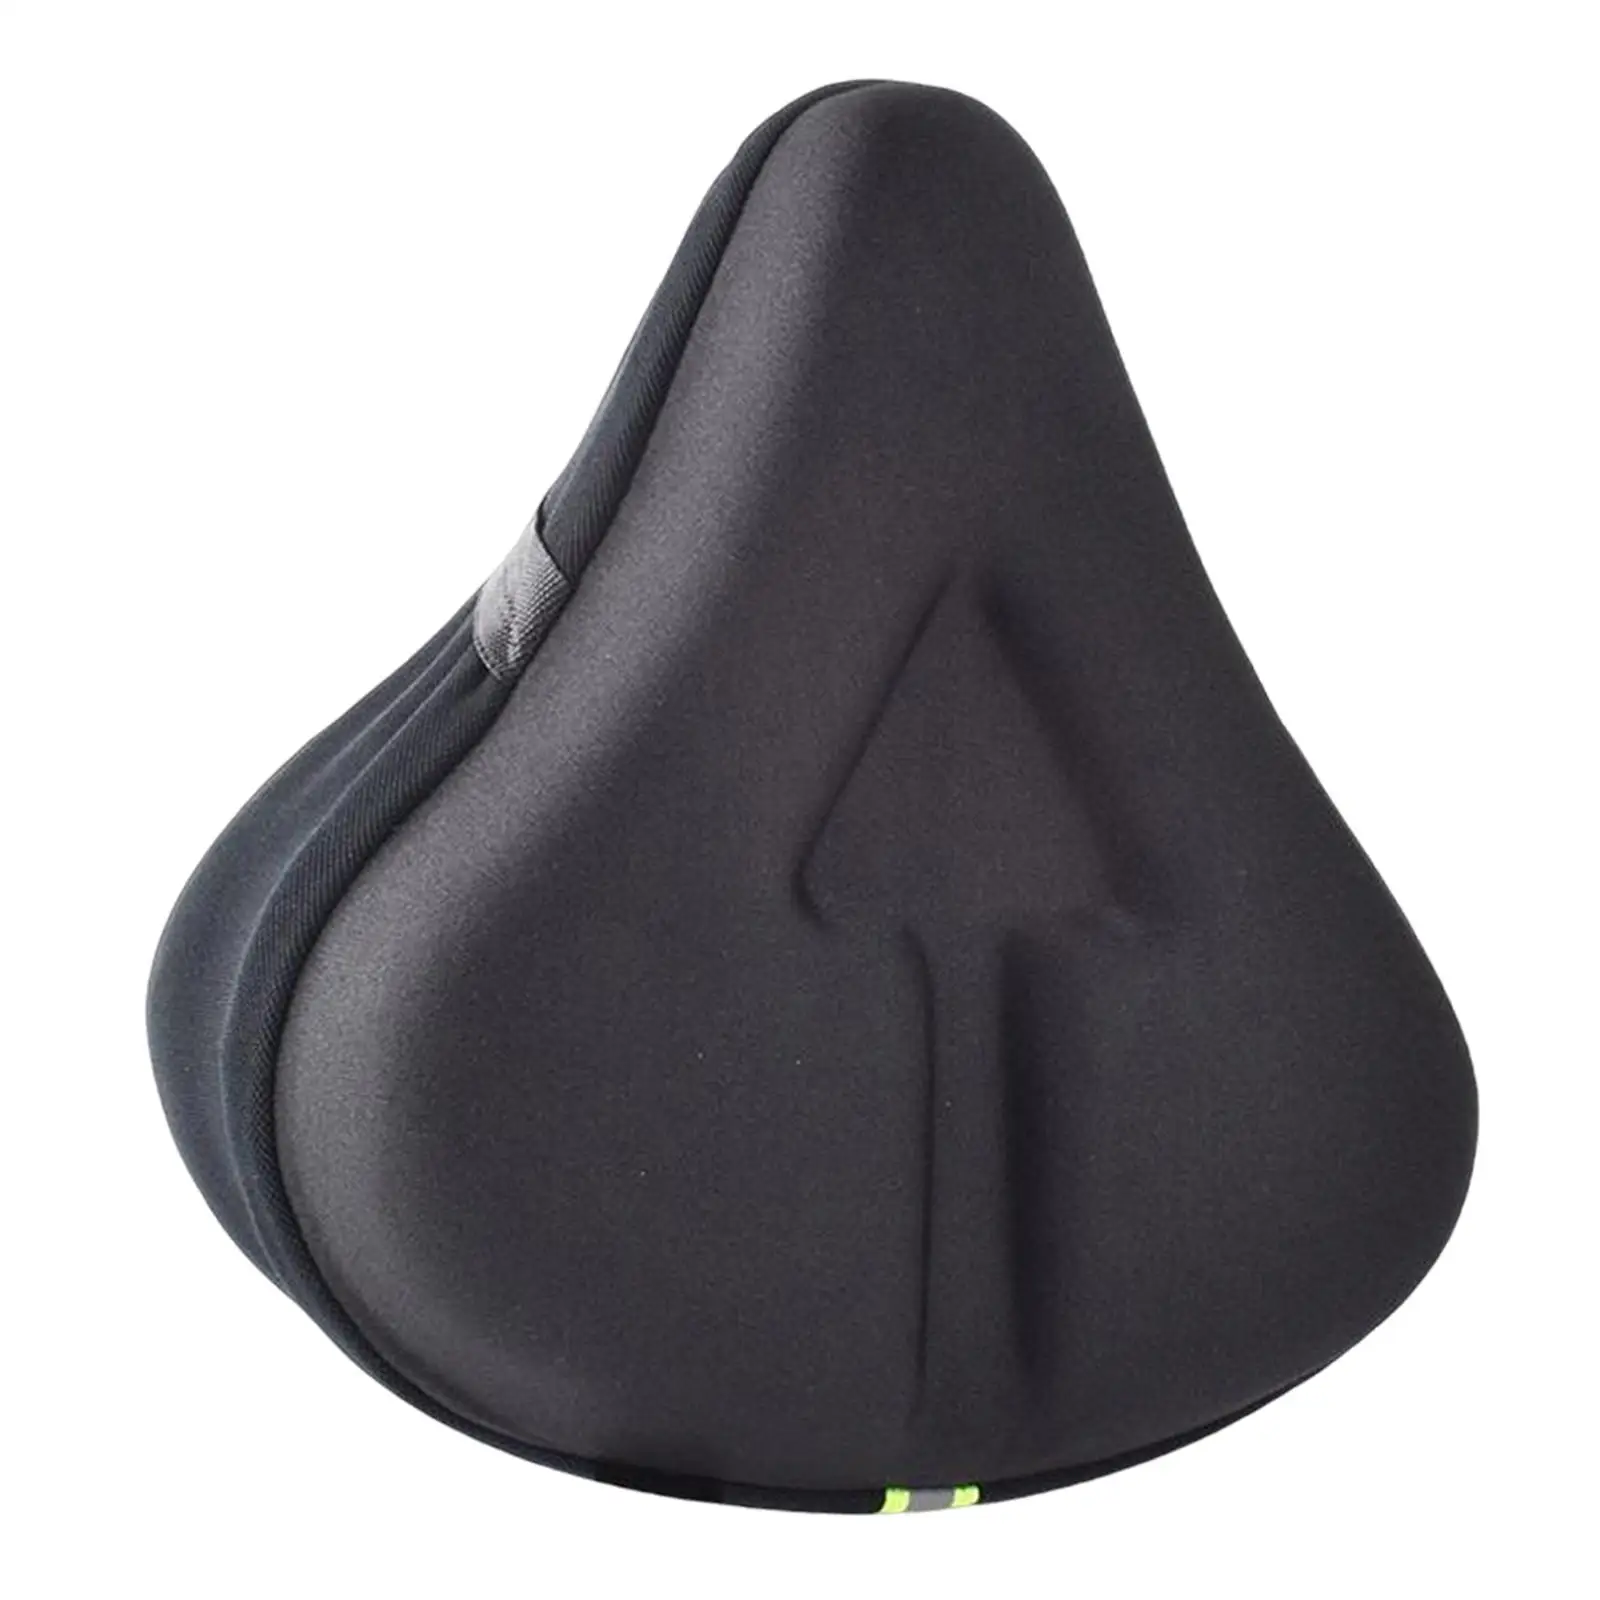 Wide Bike Seat Cushion Thicken Bike Seat Cover Comfortable for Exercise Bike Stationary Bikes Road Bicycle Cycling Seats